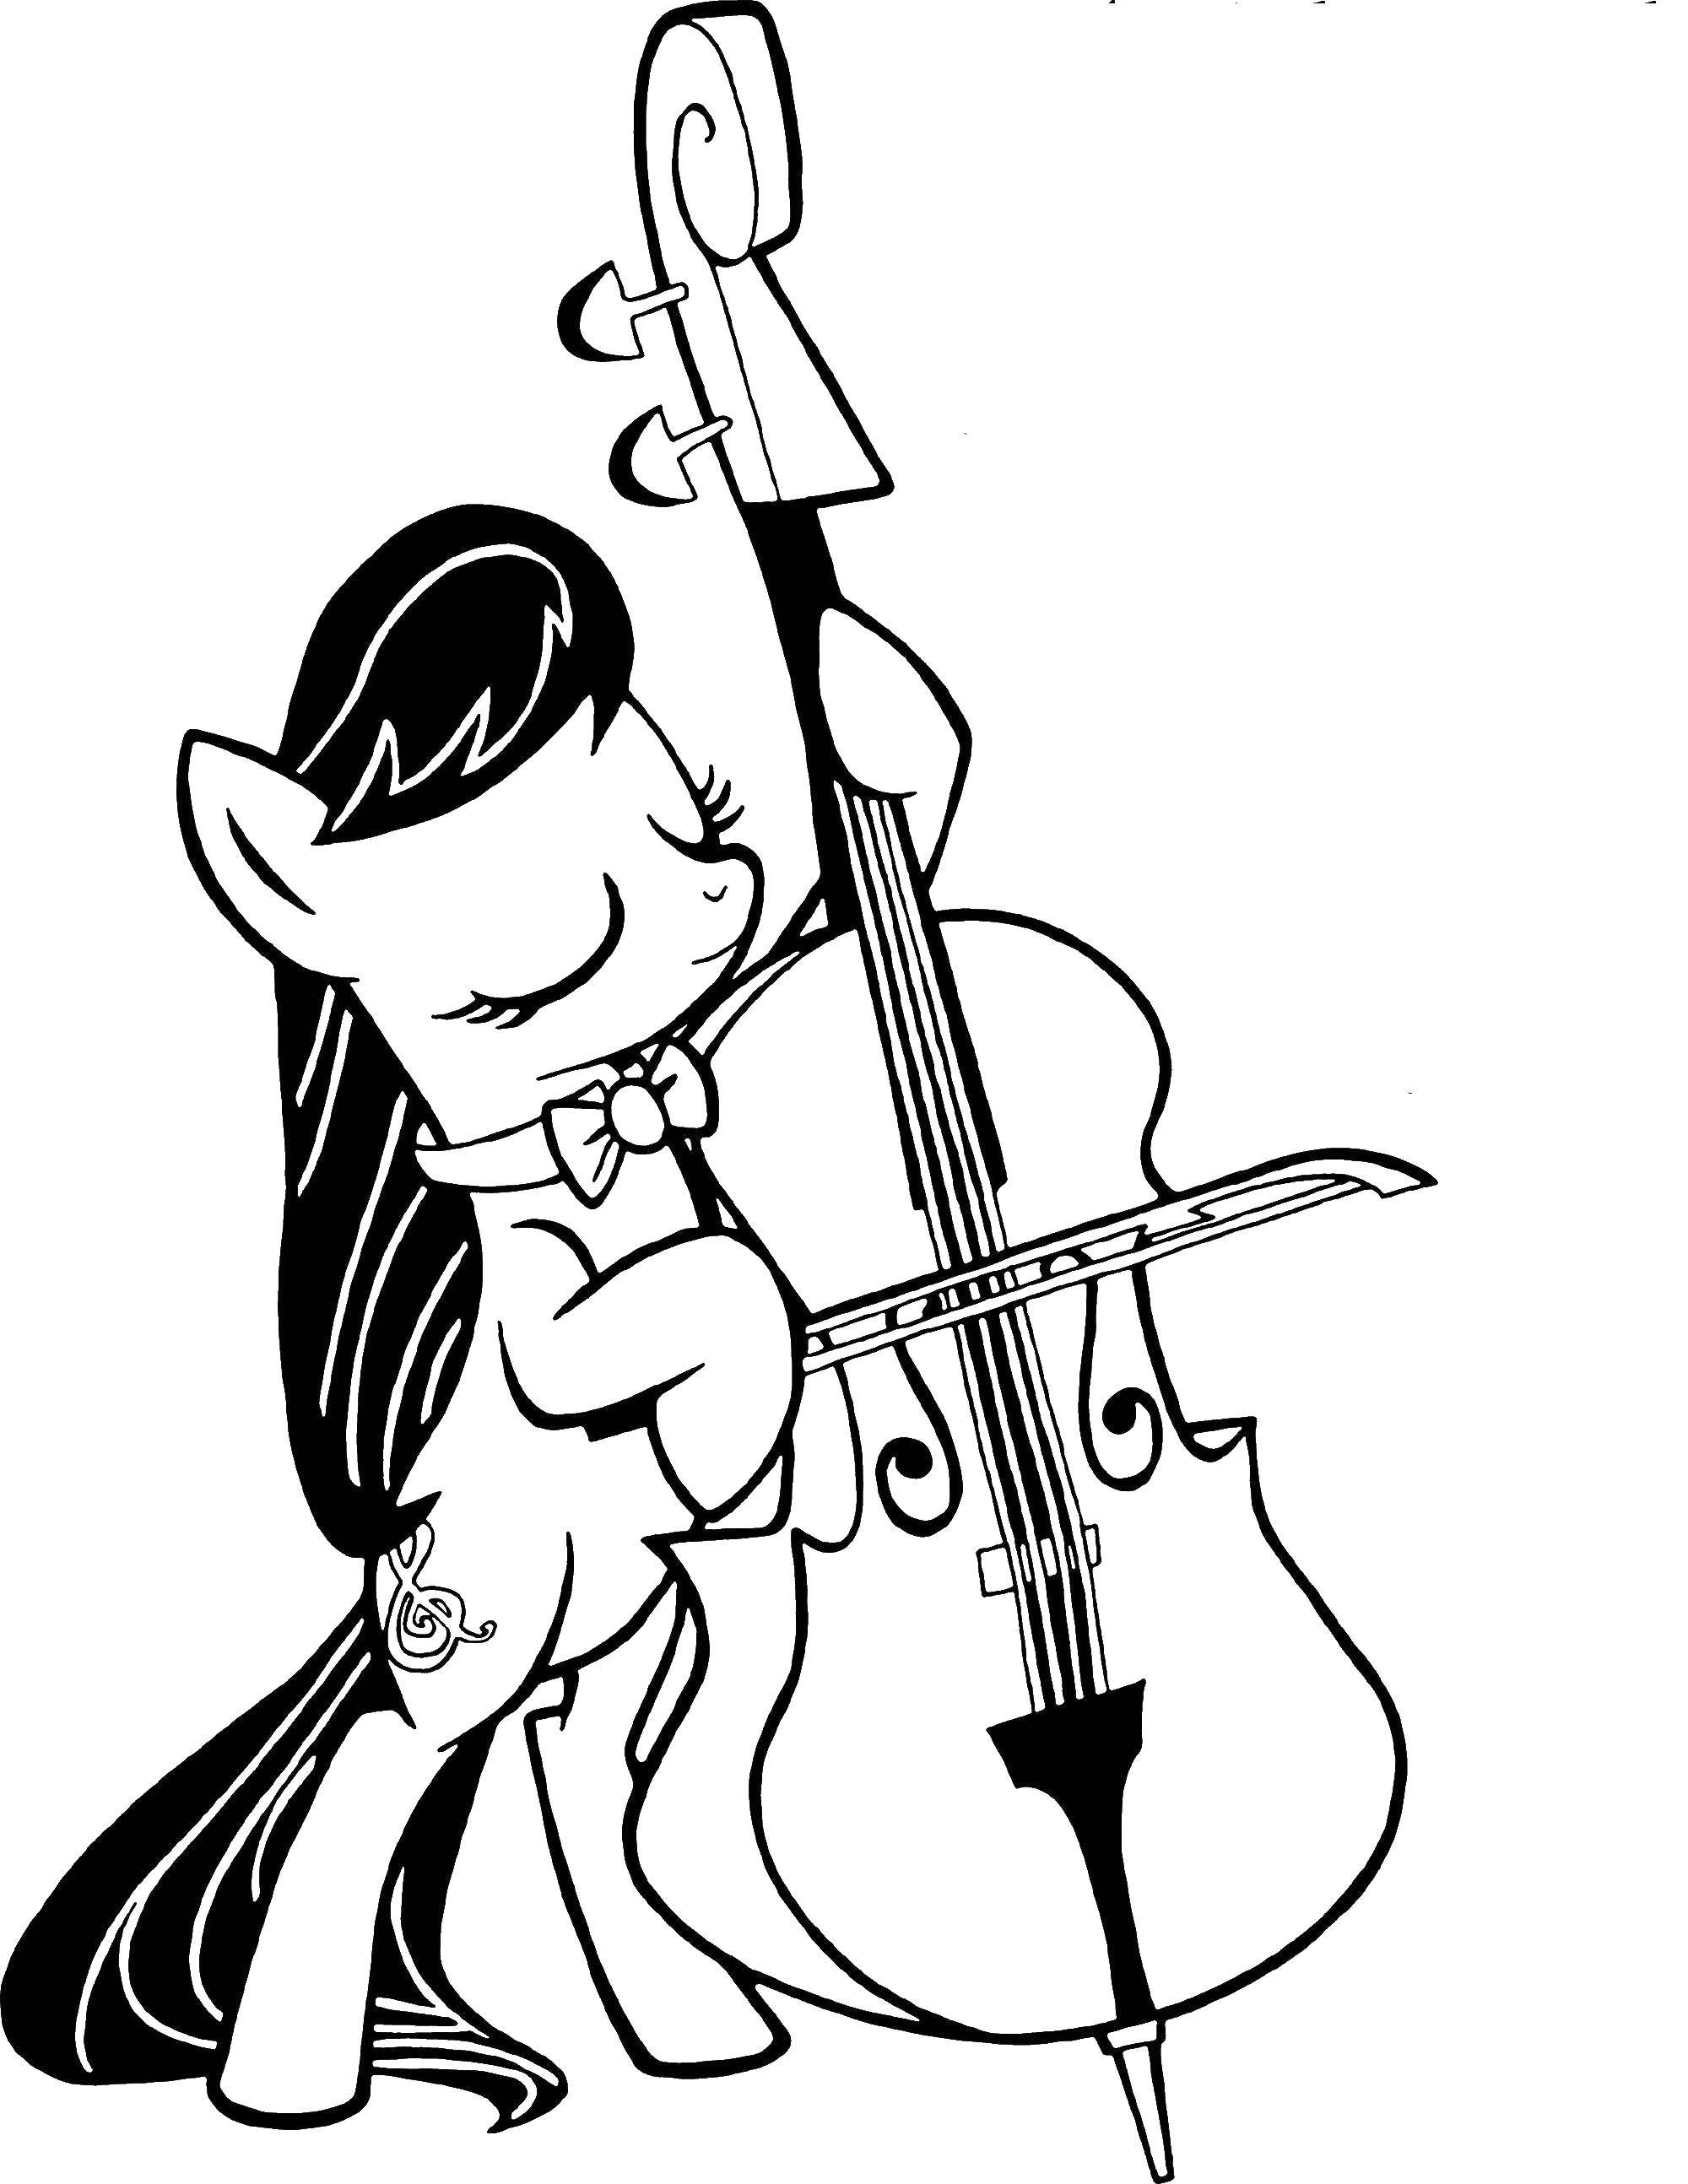 Coloring Ponies from my little pony playing the violin. Category my little pony. Tags:  Pony, My little pony.